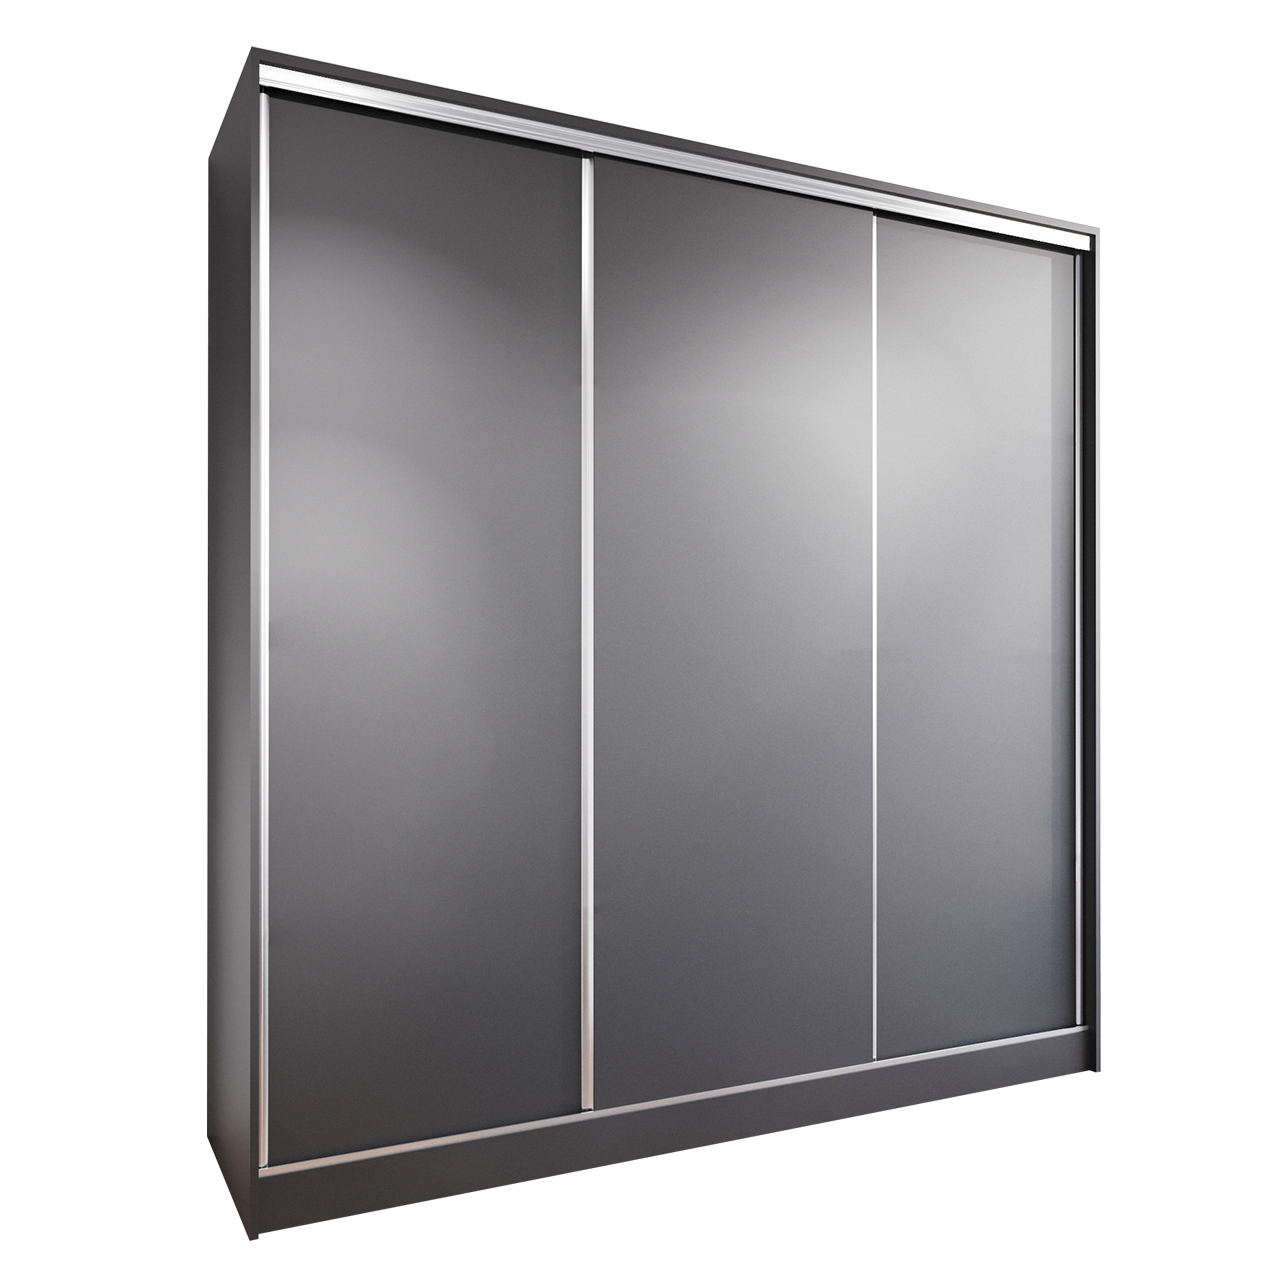 Sliding Wardrobe with Drawers BRITTO D 180 black